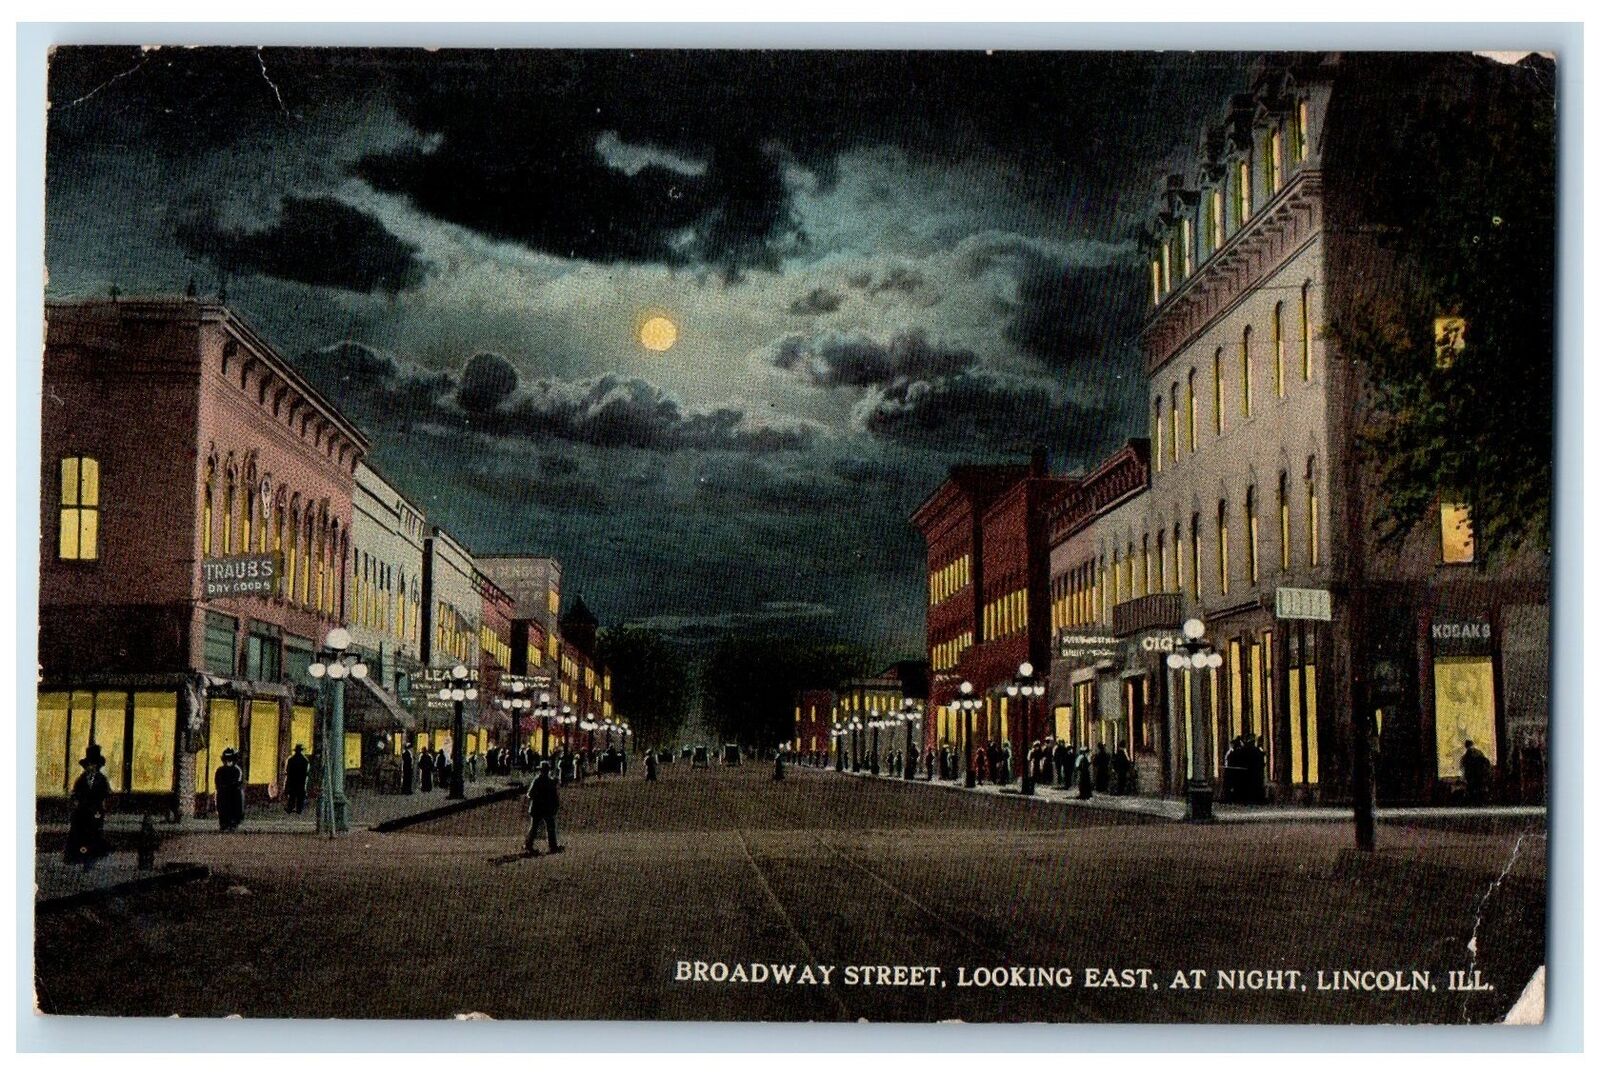 1915 Broadway Street Looking East At Night Lincoln Illinois IL Posted Postcard